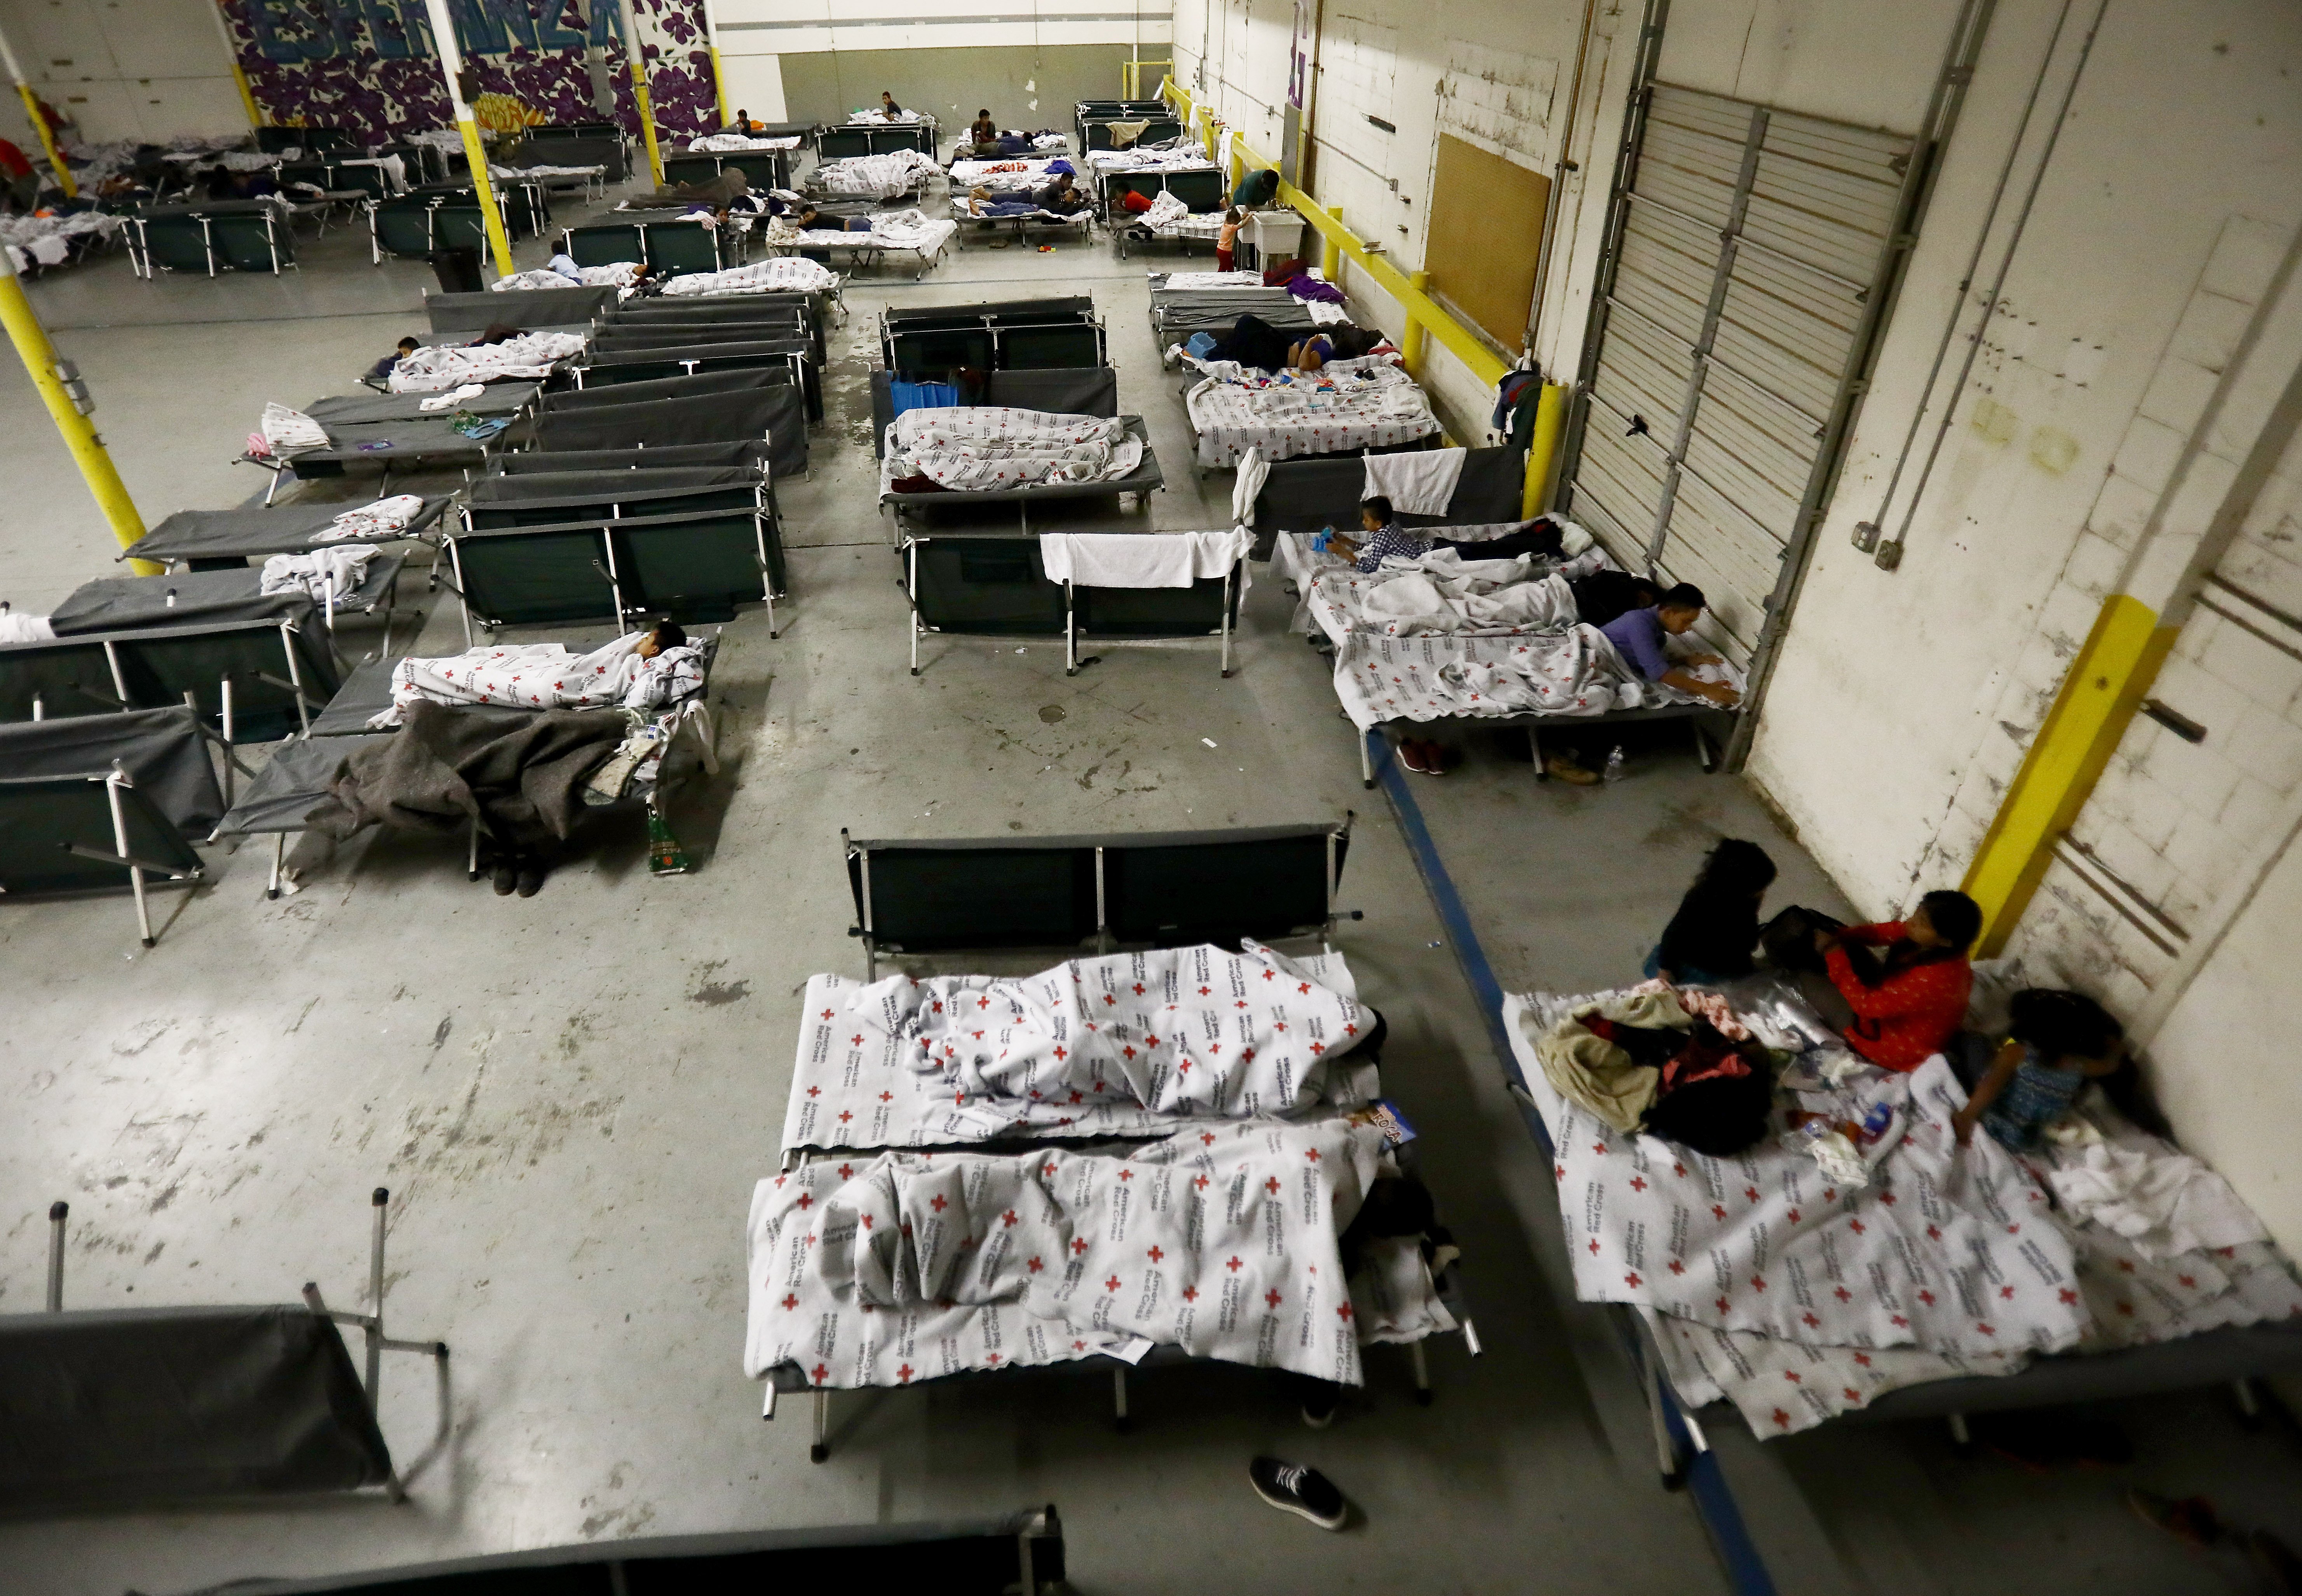 EL PASO, TEXAS - MAY 15: Migrants from Central America gather in the 'House of the Refugee' shelter for migrants, an Annunciation House site, on May 15, 2019 in El Paso, Texas. Annunciation House recently opened the new shelter in a warehouse to keep pace with the recent surge in migrants crossing the border in the El Paso sector. Approximately 1,000 migrants per day are being released by authorities in the El Paso sector of the U.S.-Mexico border. President Trump is expected to present a new immigration plan in a White House Rose Garden speech May 16. (Photo by Mario Tama/Getty Images)